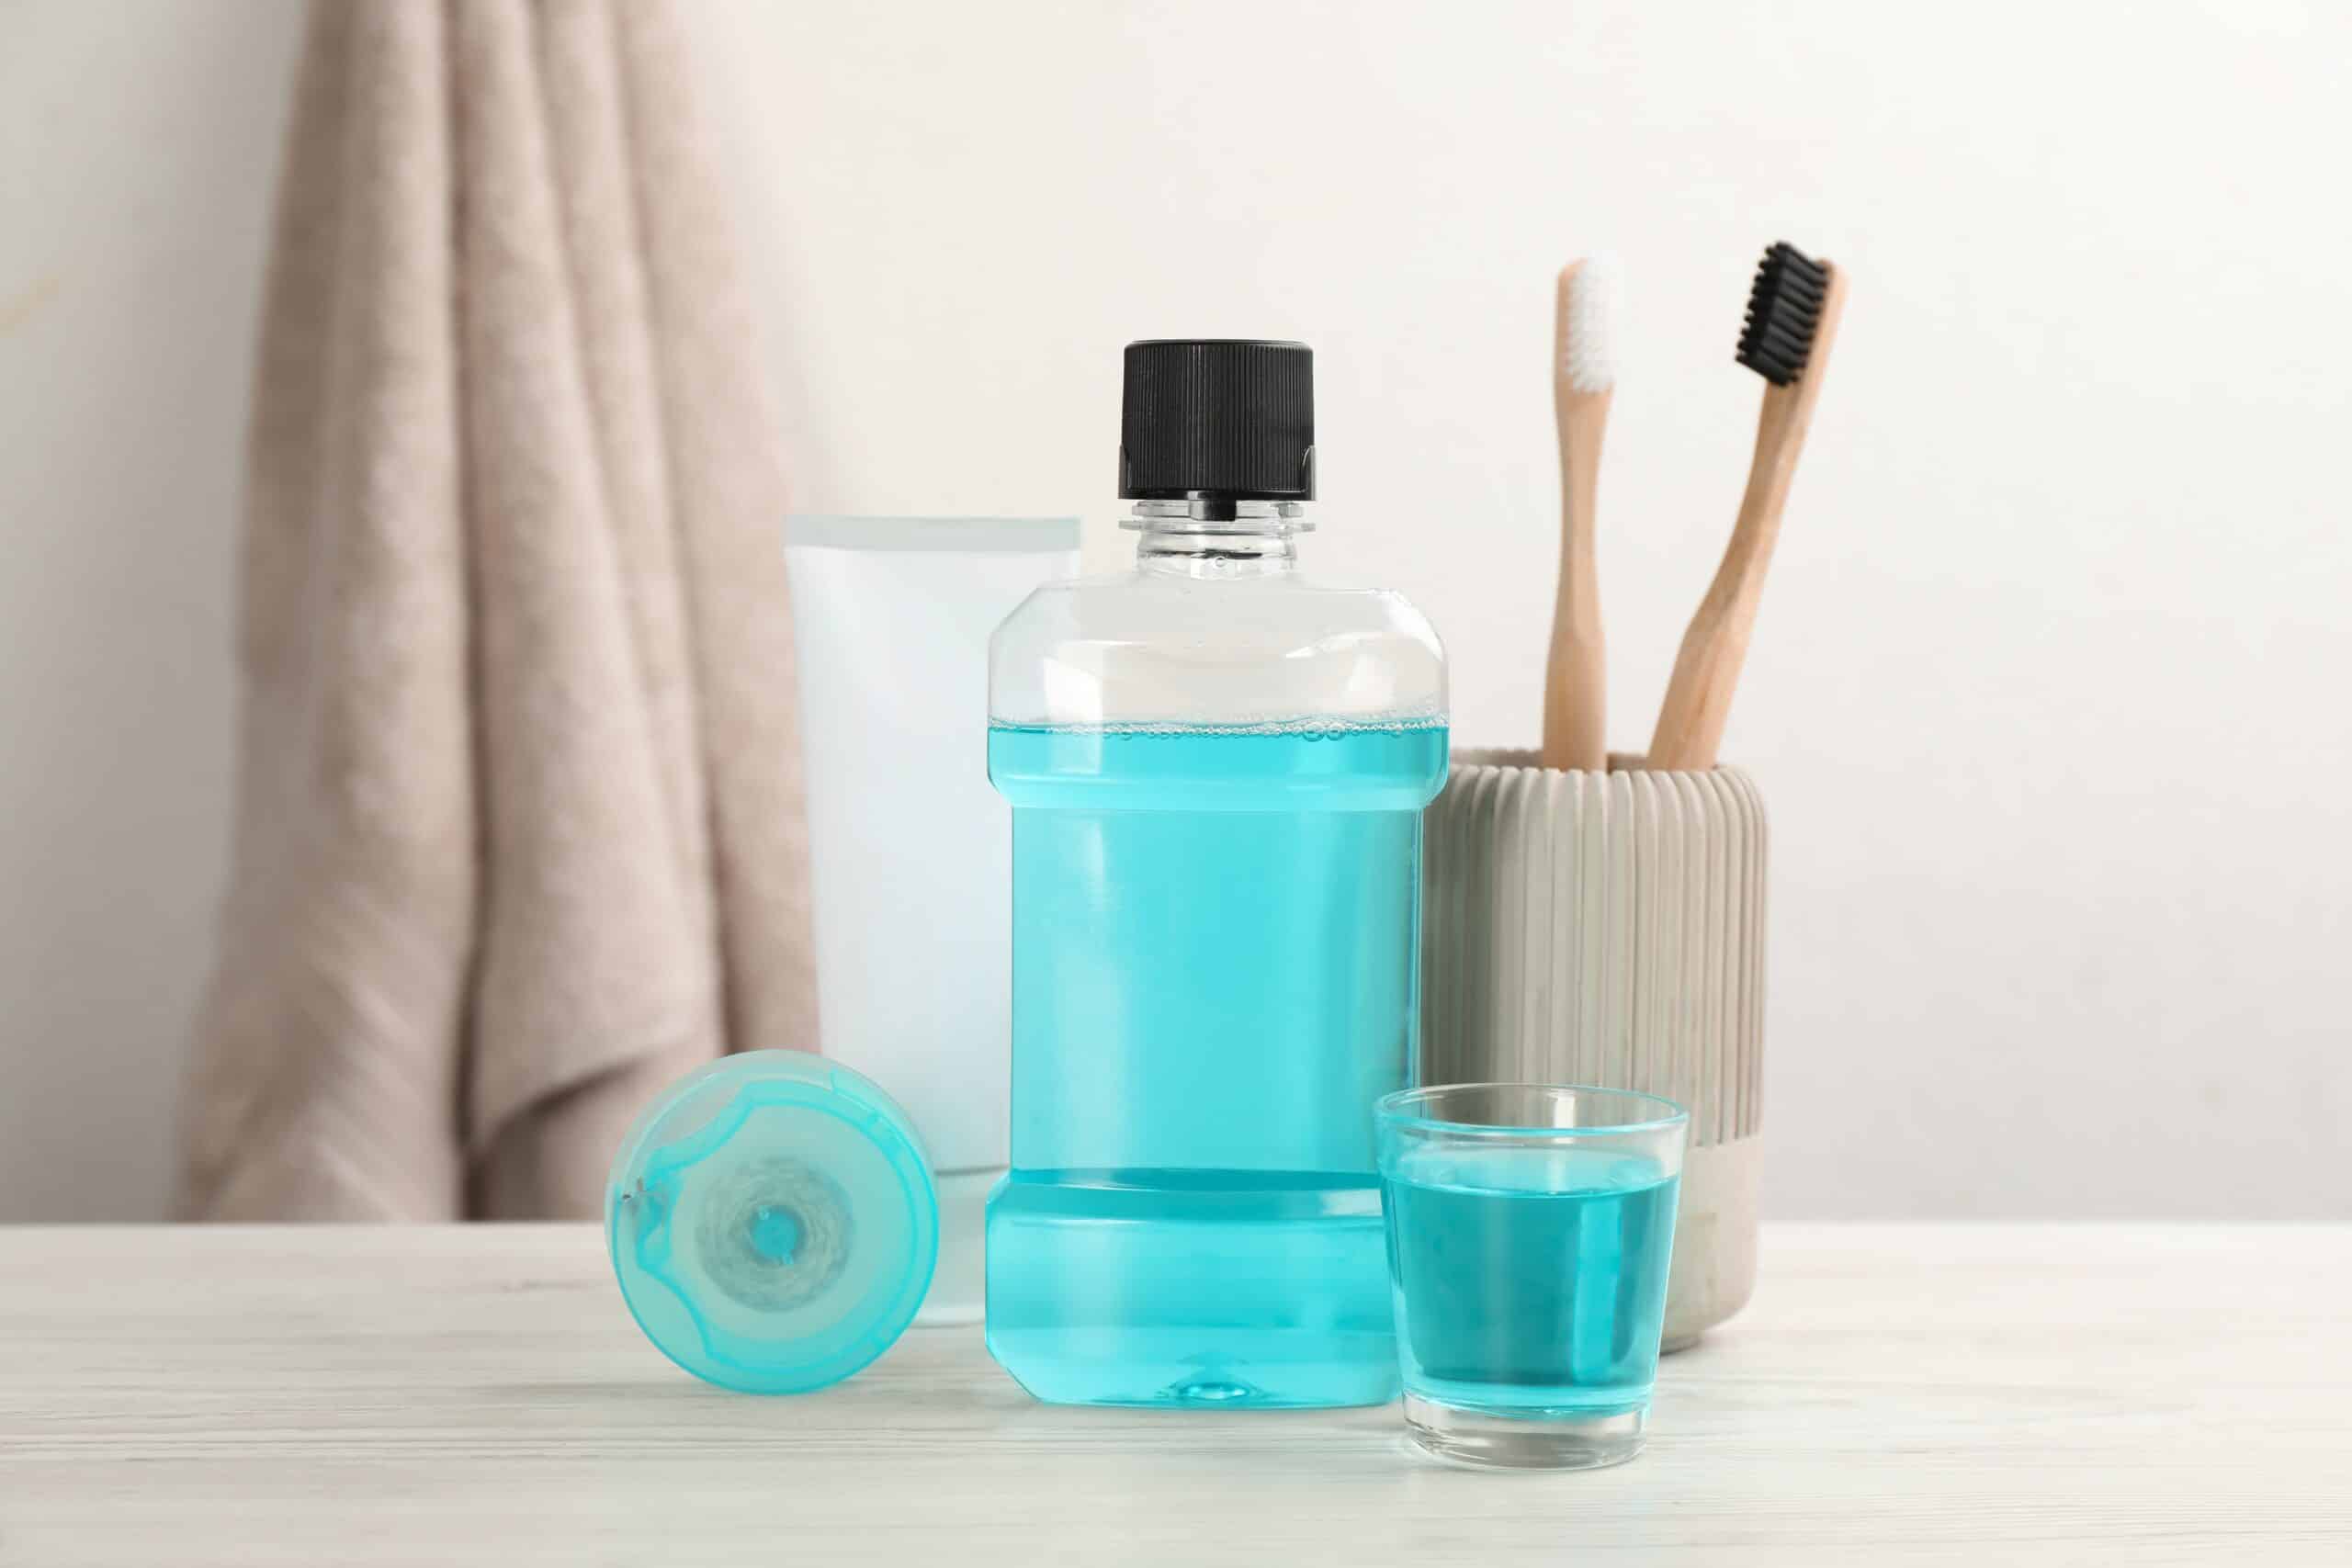 Mouthwash and other oral hygiene products on white wooden table in bathroom